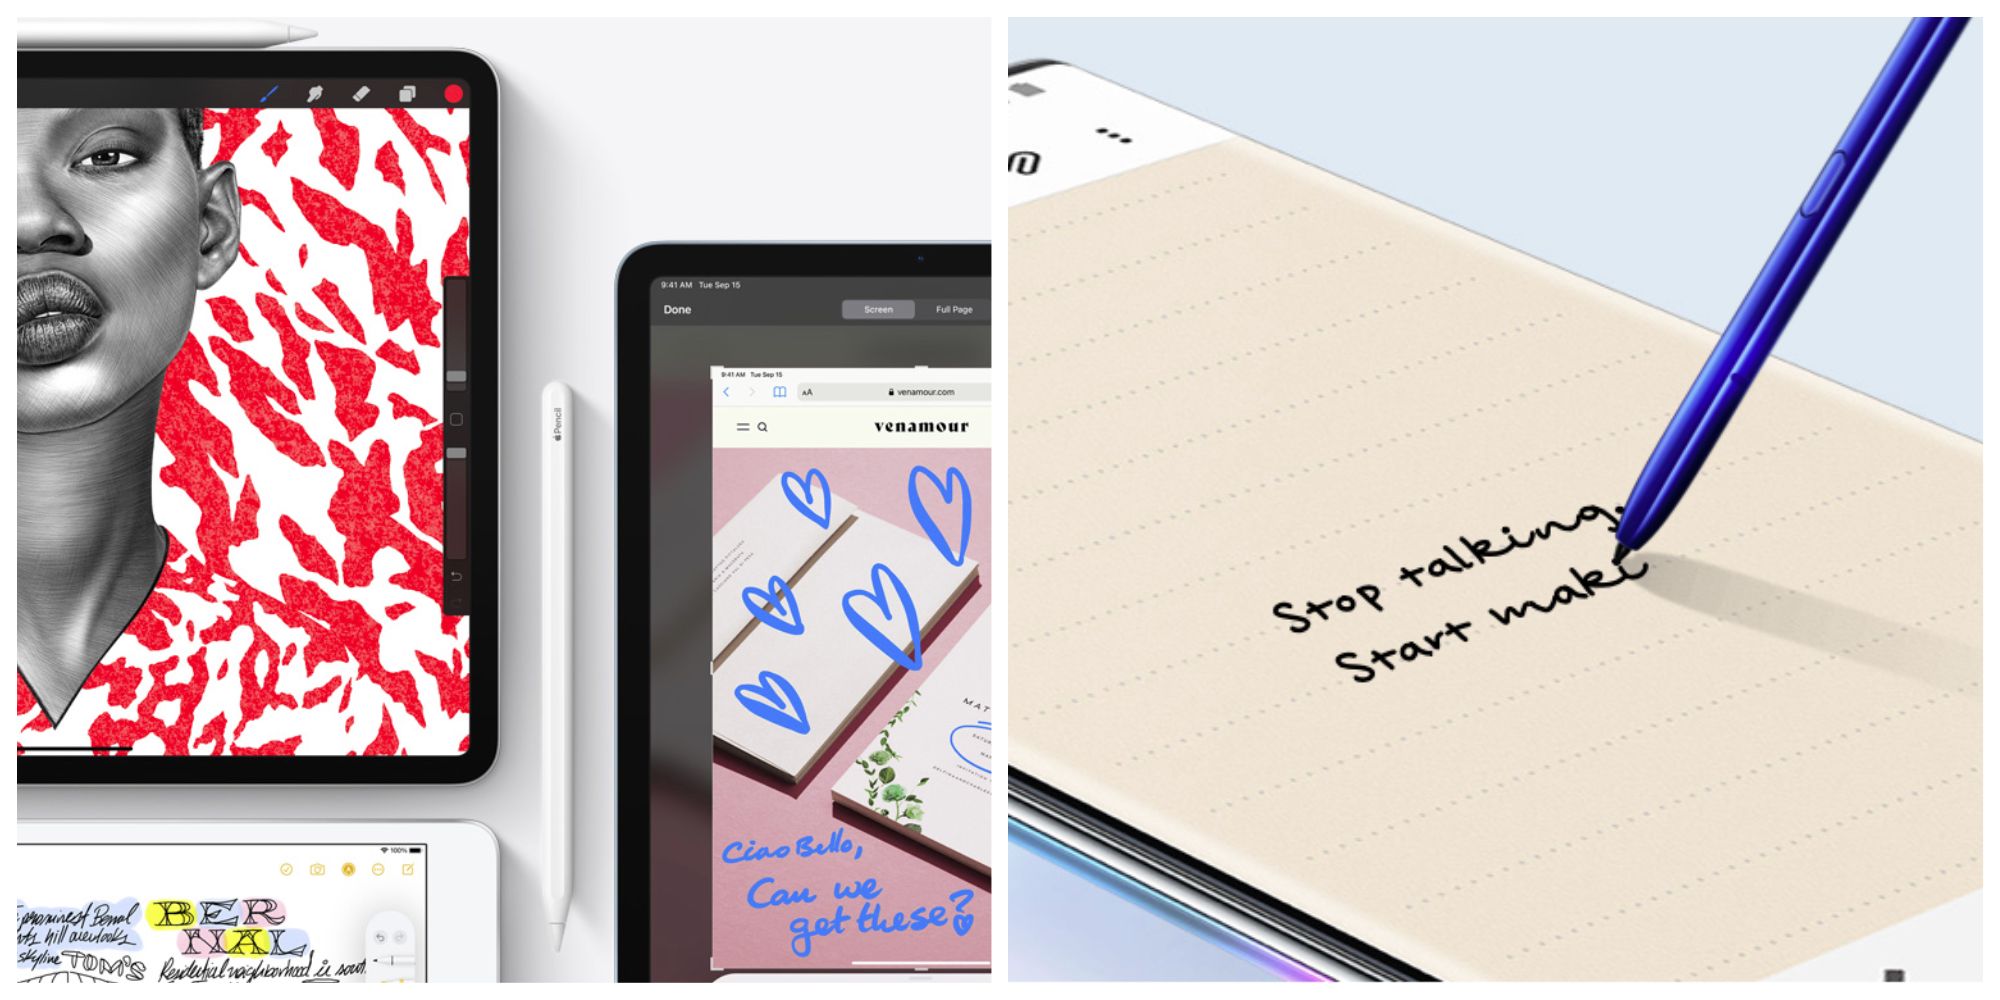 Apple Pencil vs Samsung S Pen comparison: For drawing and taking notes